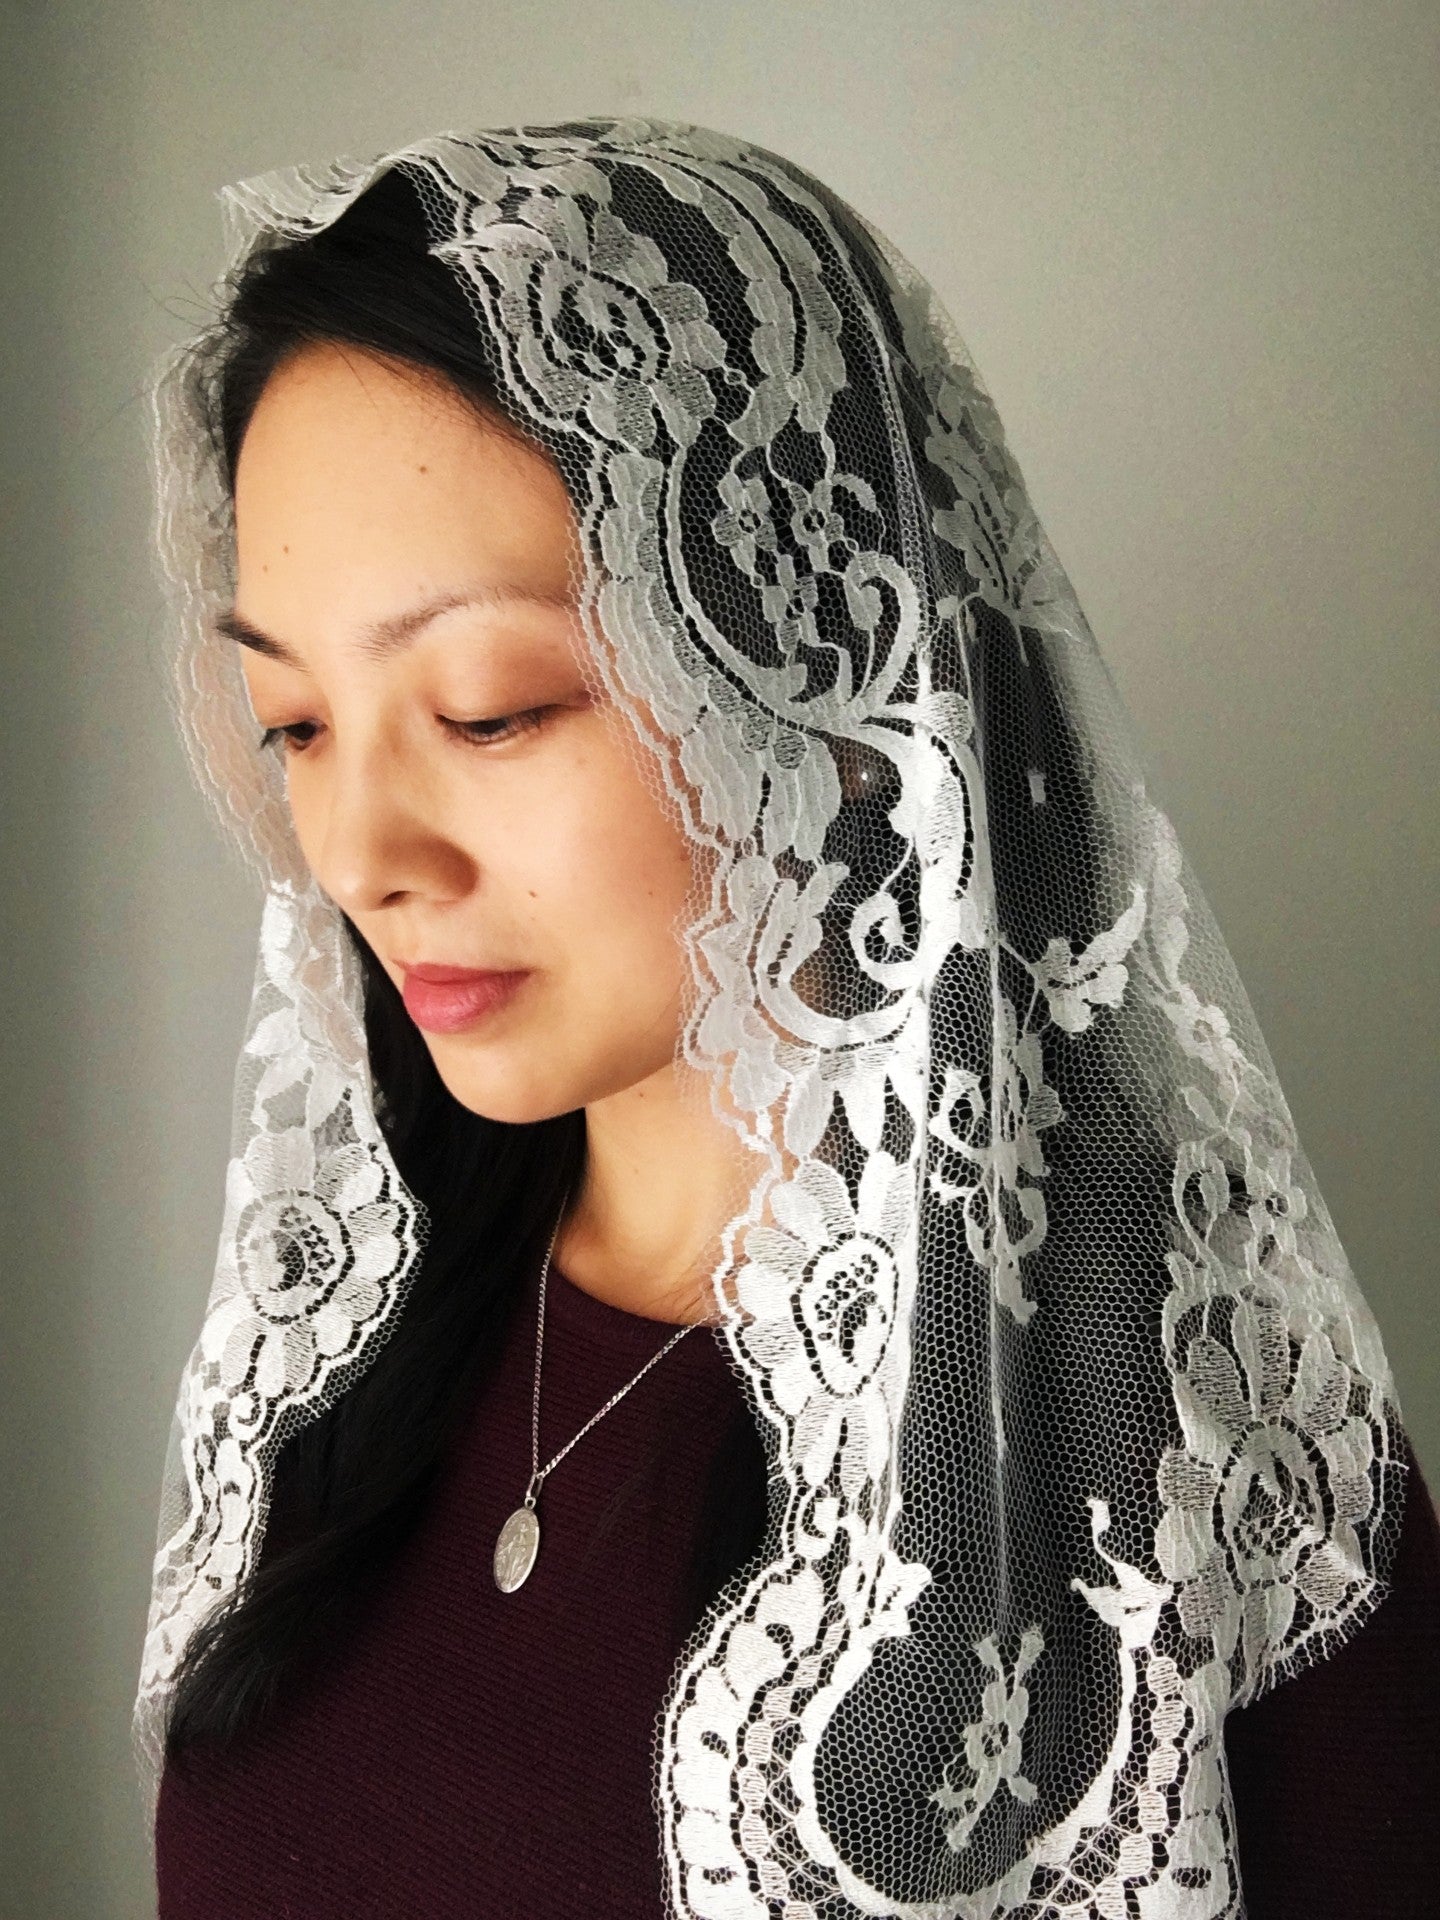 St. Zelie Martin Traditional French Lace Mantilla (Black & Ivory)